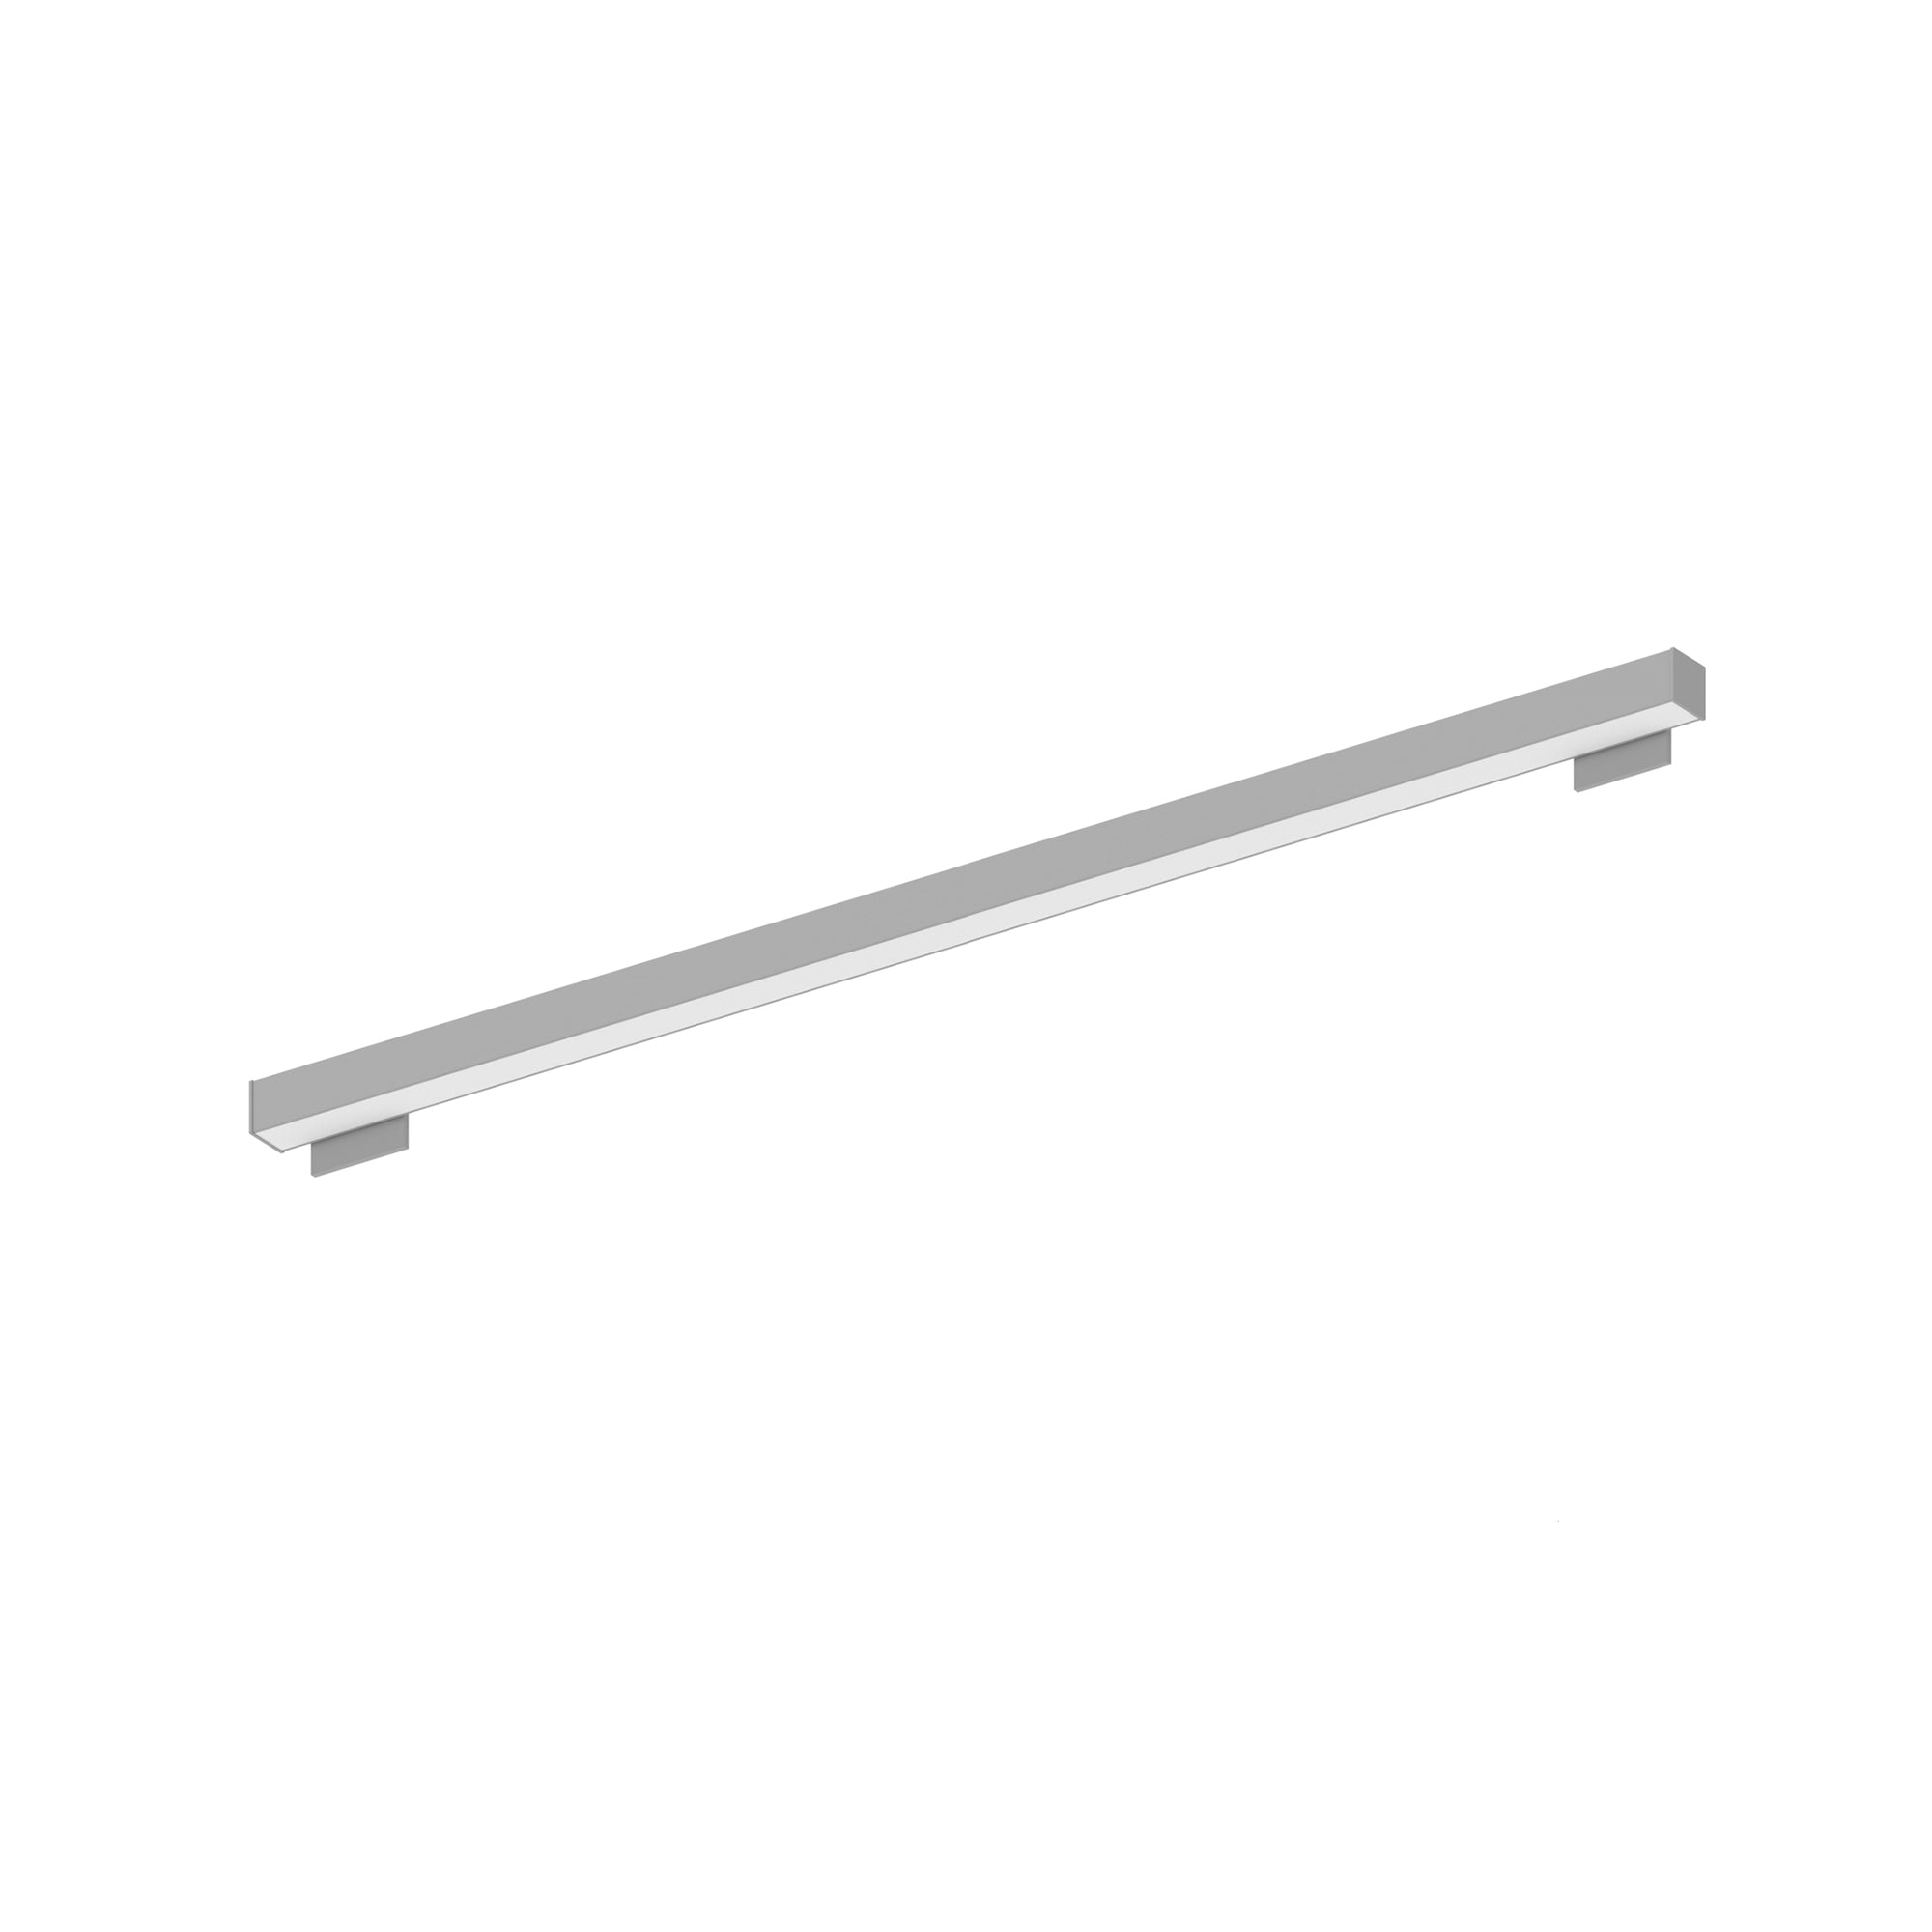 Nora Lighting NWLIN-81035A/L4-R4 - Linear - 8' L-Line LED Wall Mount Linear, 8400lm / 3500K, 4 Inchx4 Inch Left Plate & 4 Inchx4 Inch Right Plate, Aluminum Finish